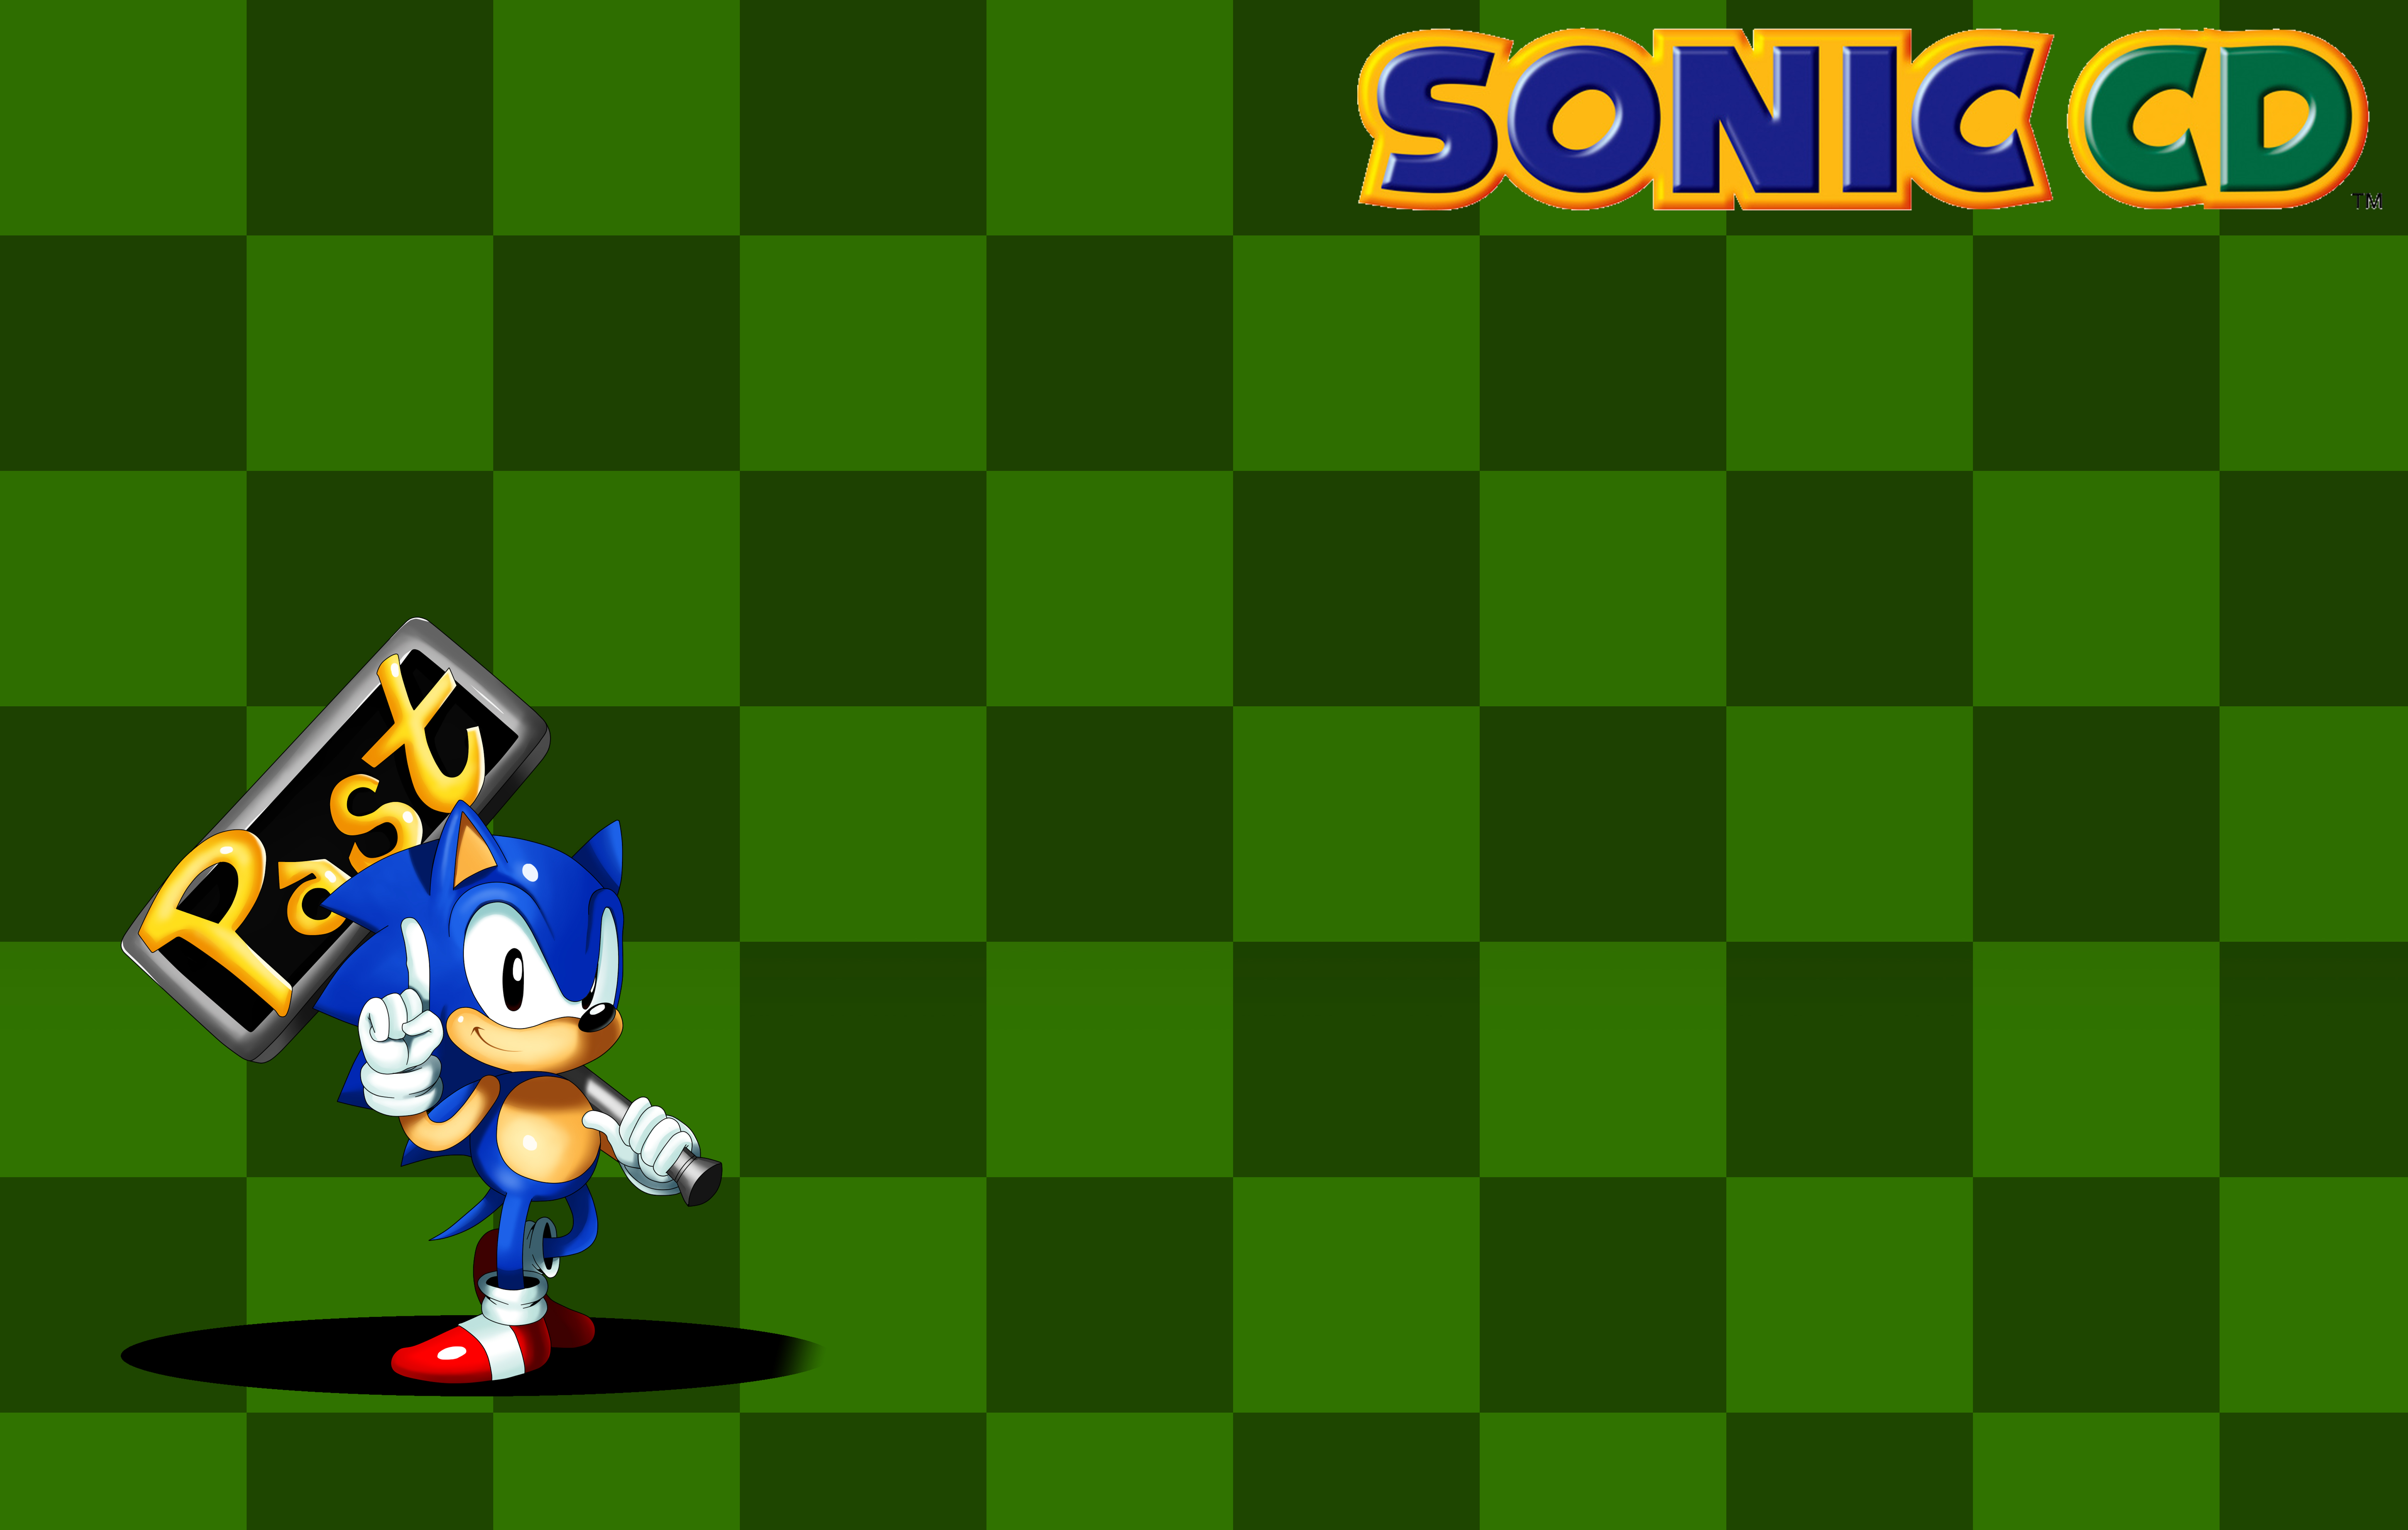 sonic cd wallpaper,games,green,pc game,indoor games and sports,cartoon